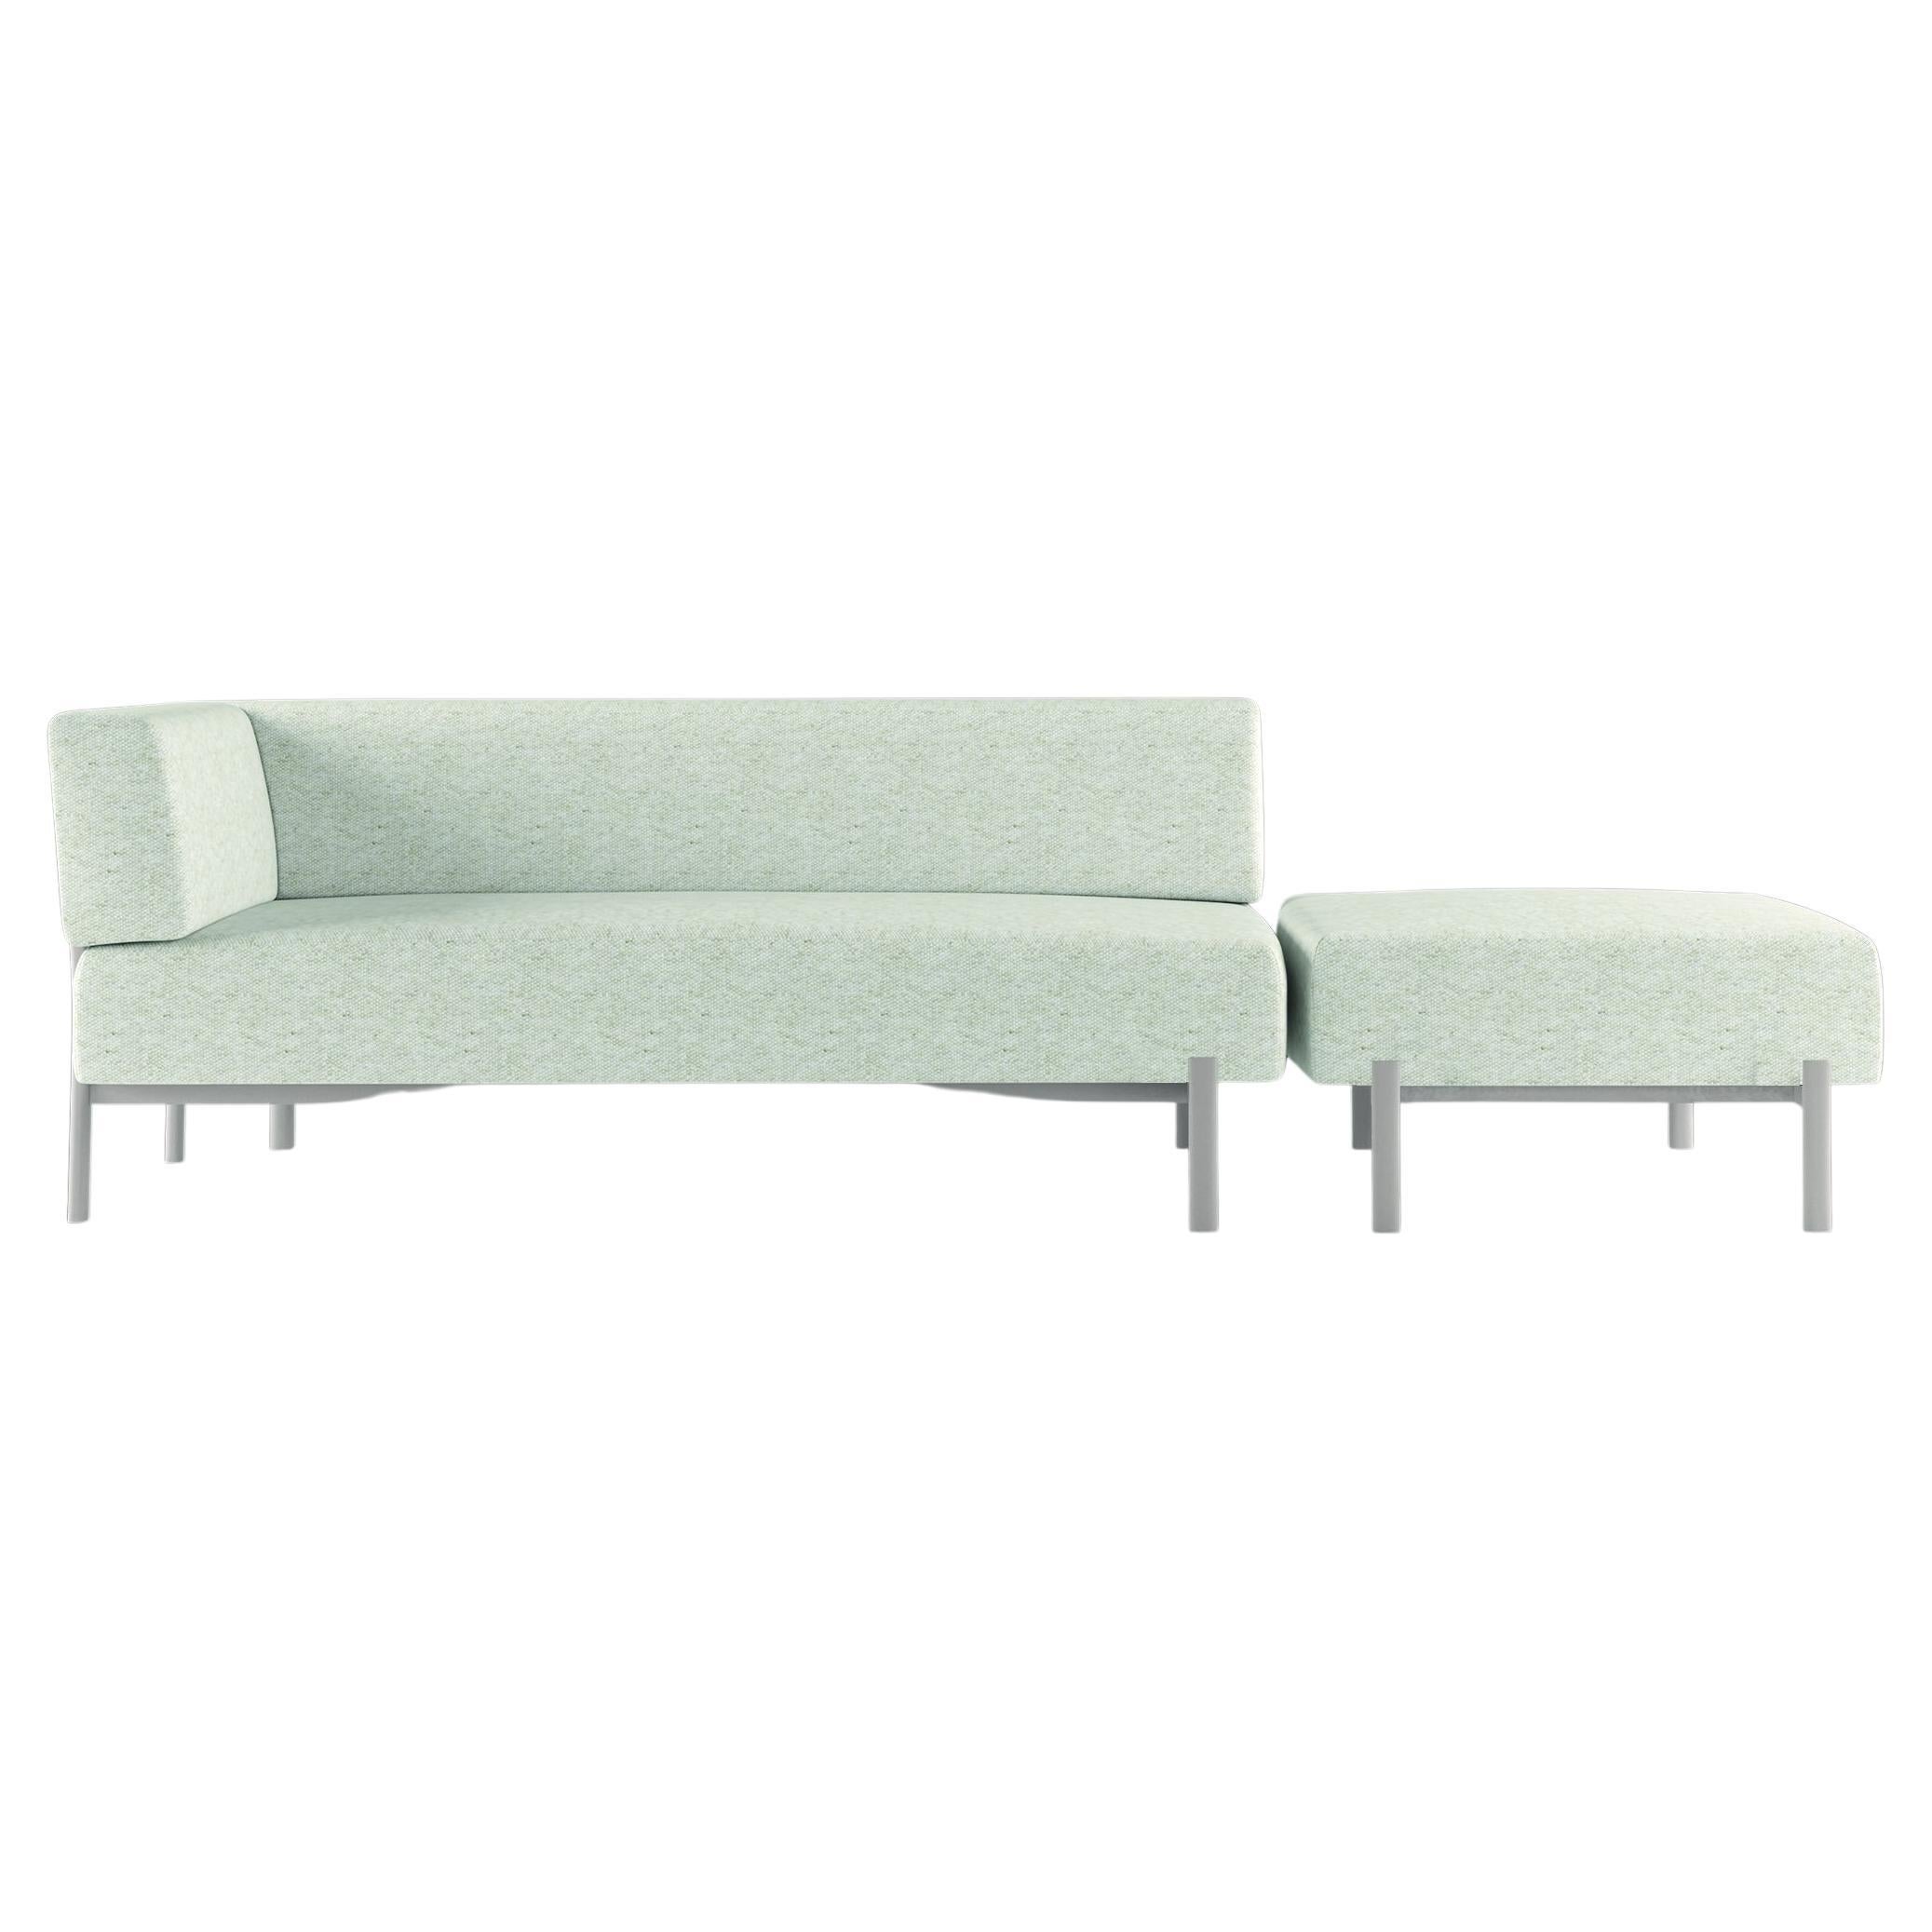 Alias T05+T07 Ten Outdoor Sofa Set and Pouf in White with Sand Lacquered Frame